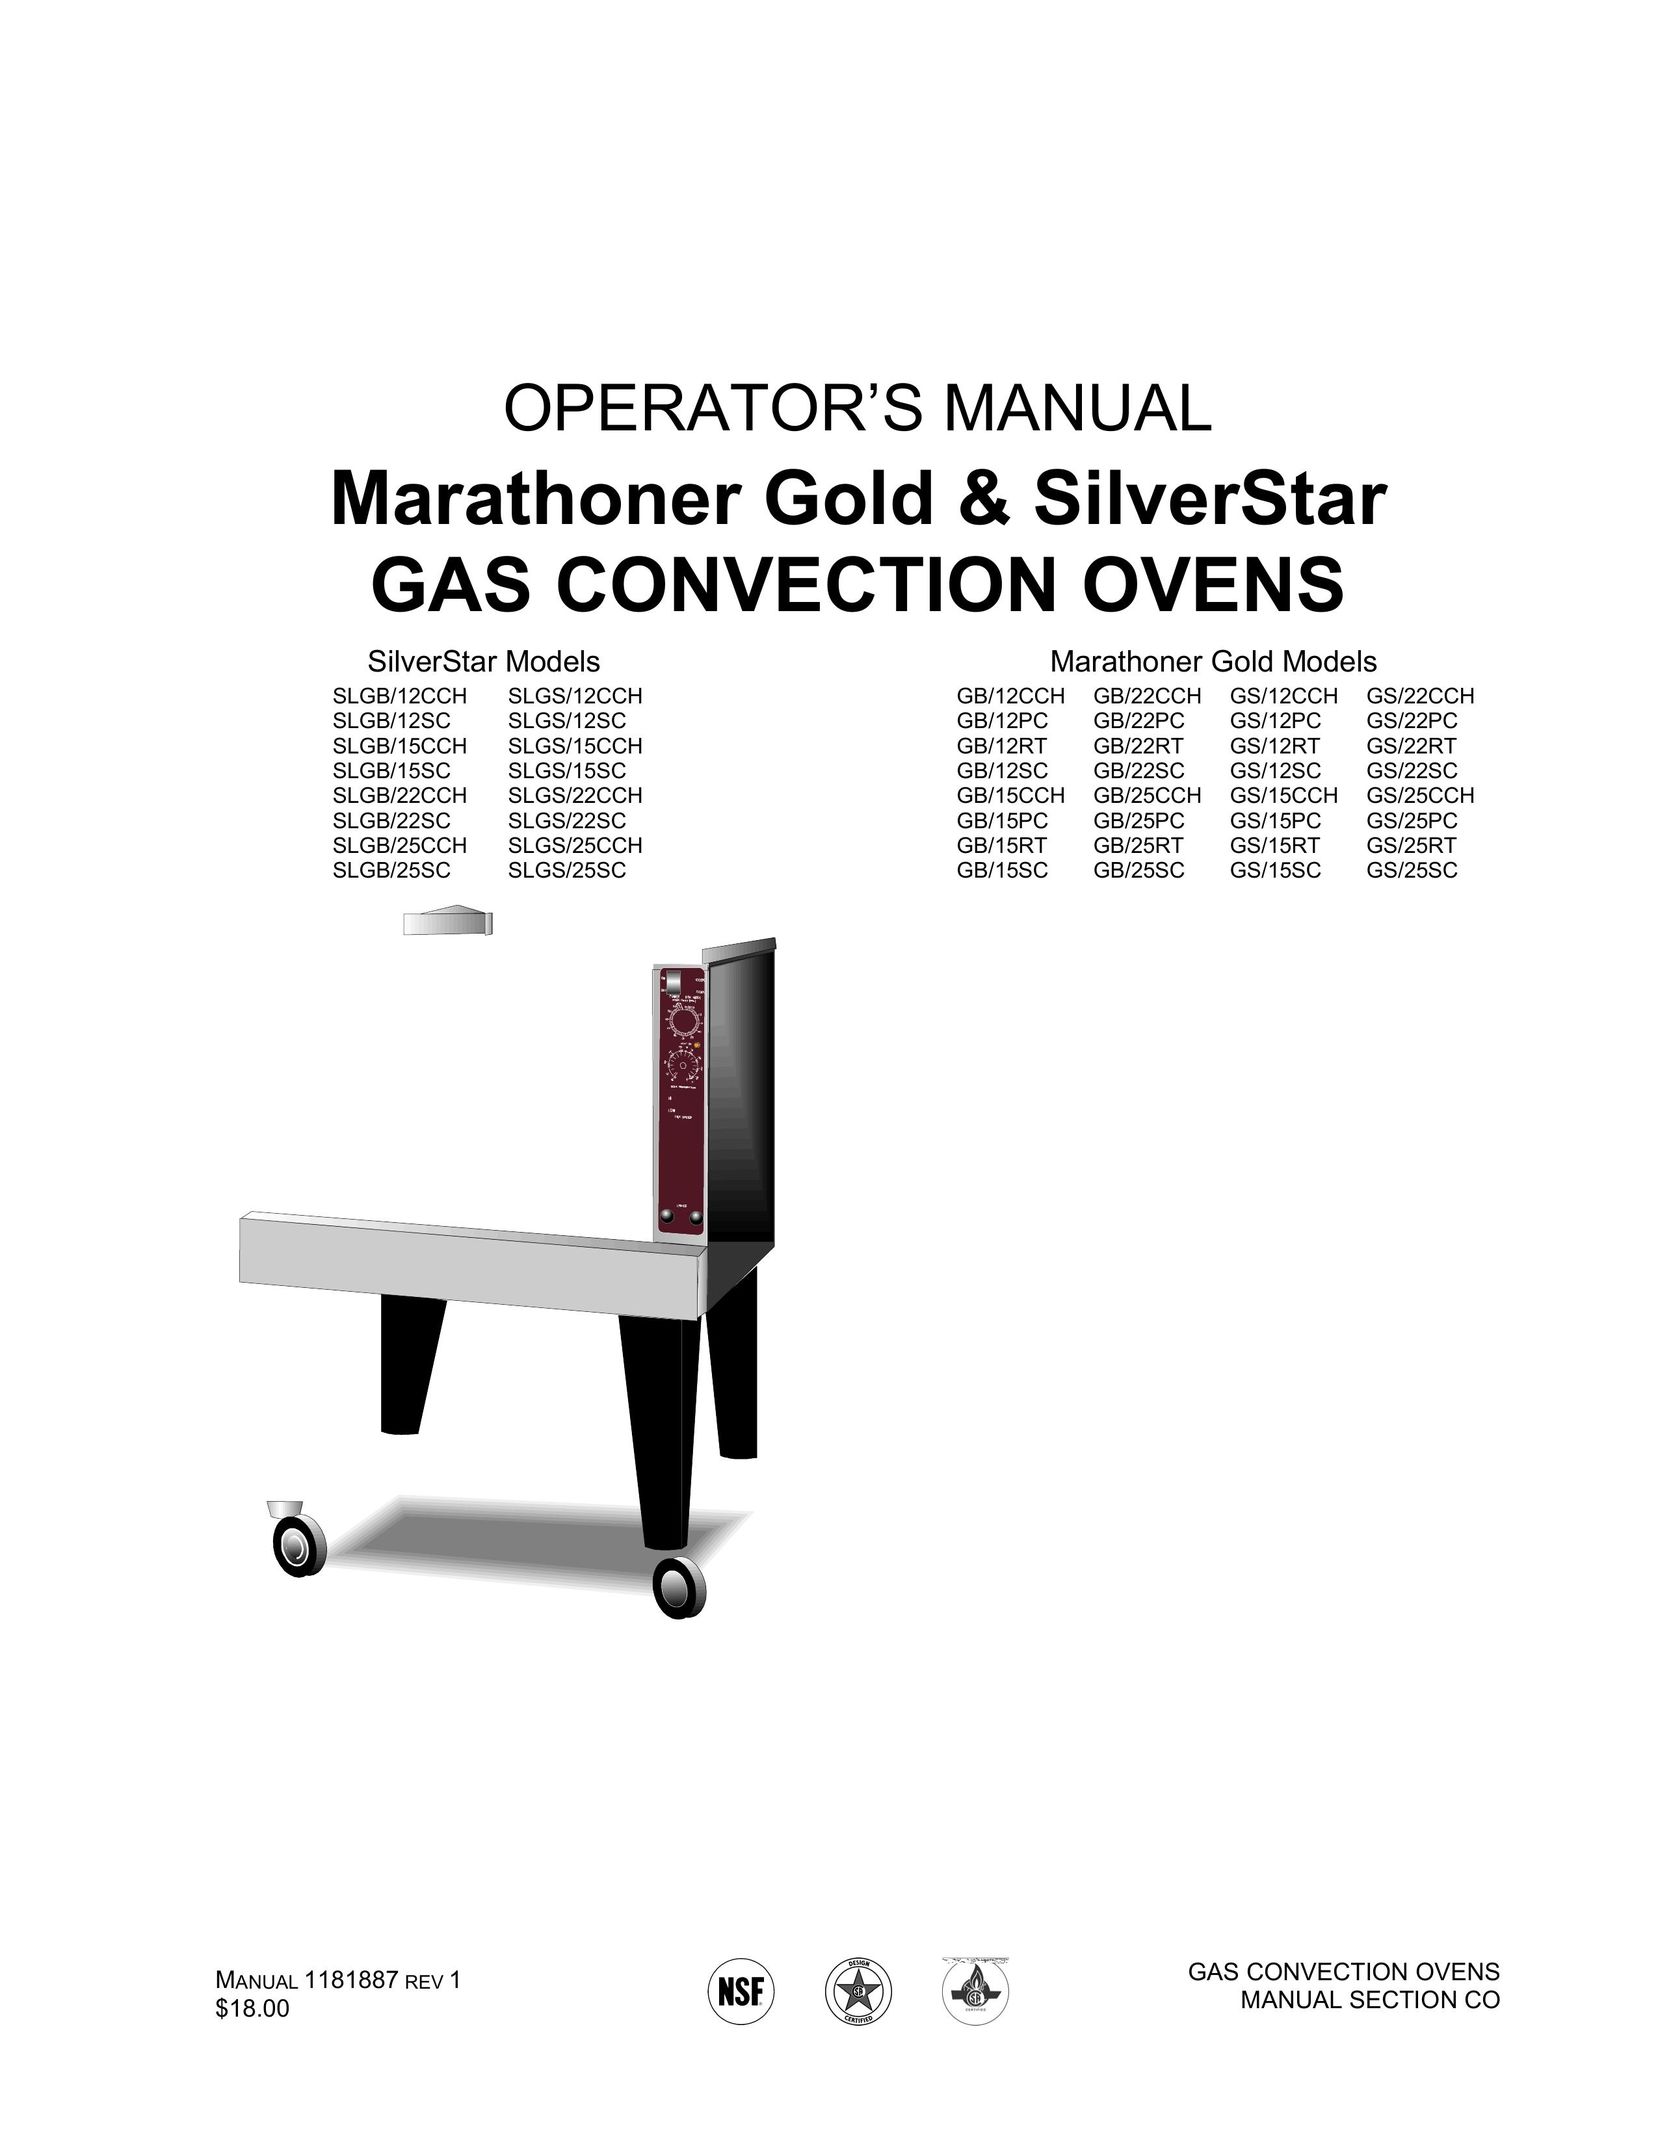 Southbend SLGB/12CCH Oven User Manual